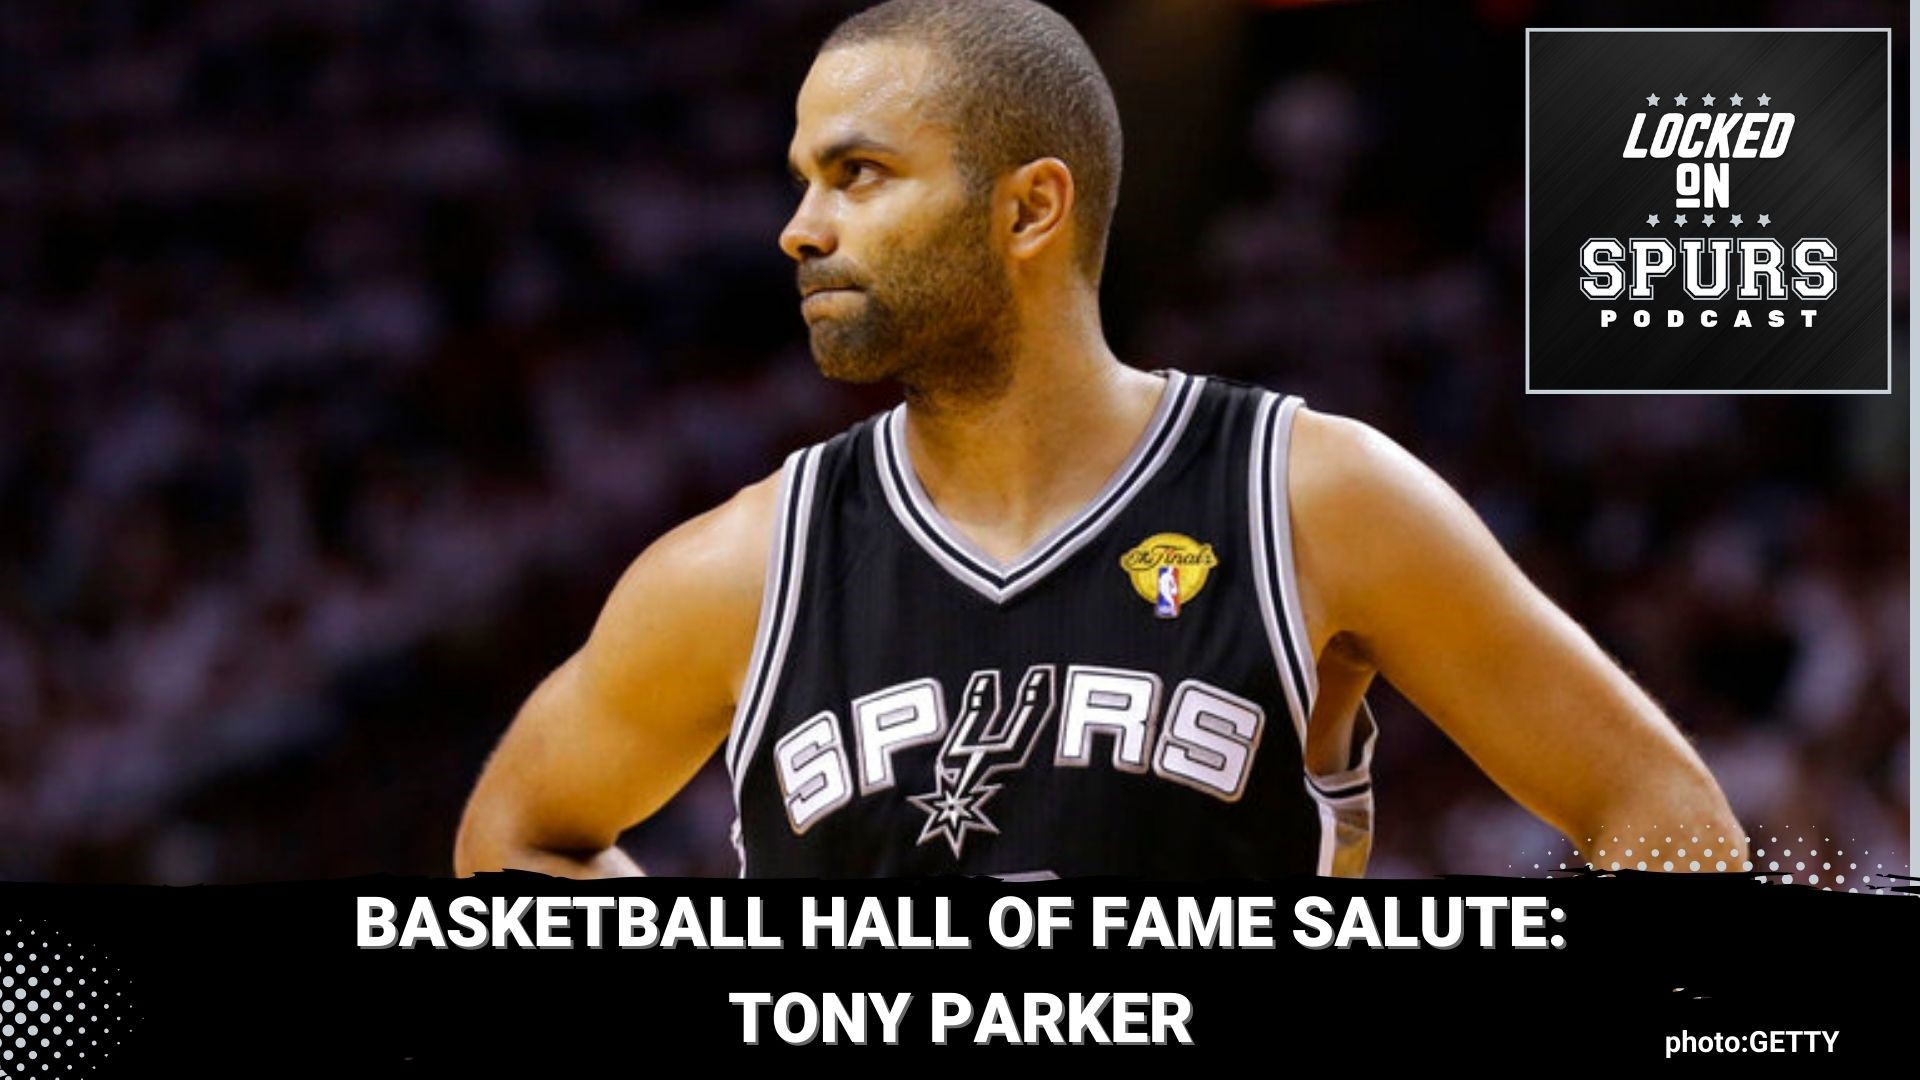 A salute to Tony Parker and his induction into the Hall of Fame.